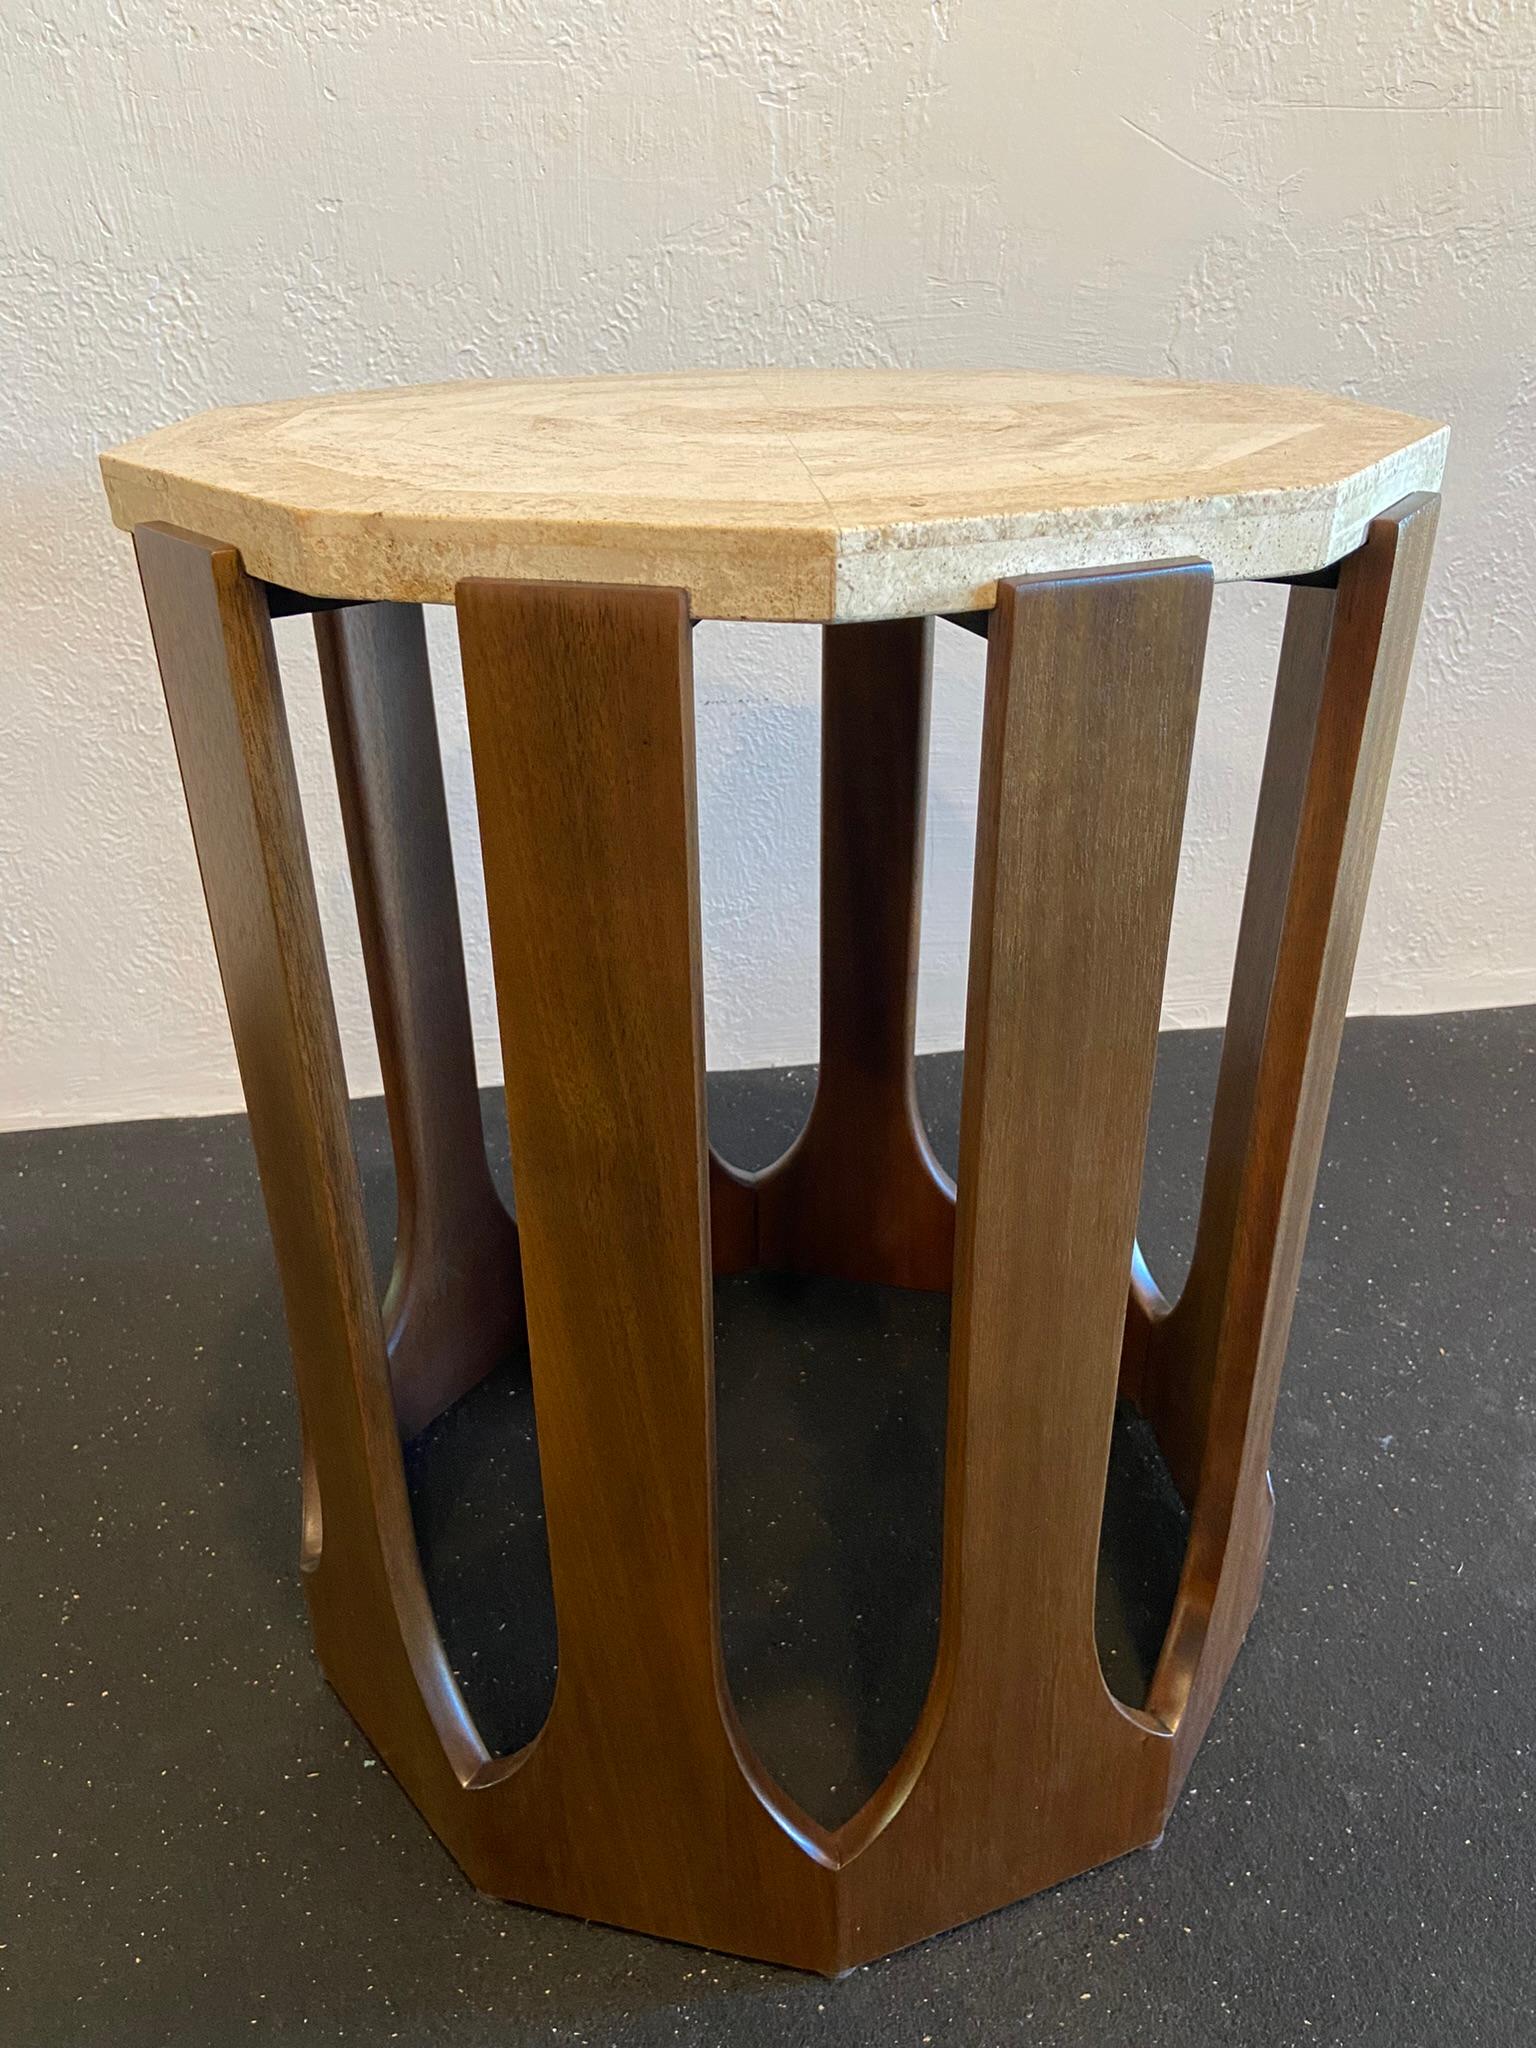 Harvey Probber mosaic travertine occasional table. Base constructed of mahogany. Table has been refinished and shows minimal signs of wear (please refer to photos).

Would work well in a variety of interiors such as modern, mid century modern,